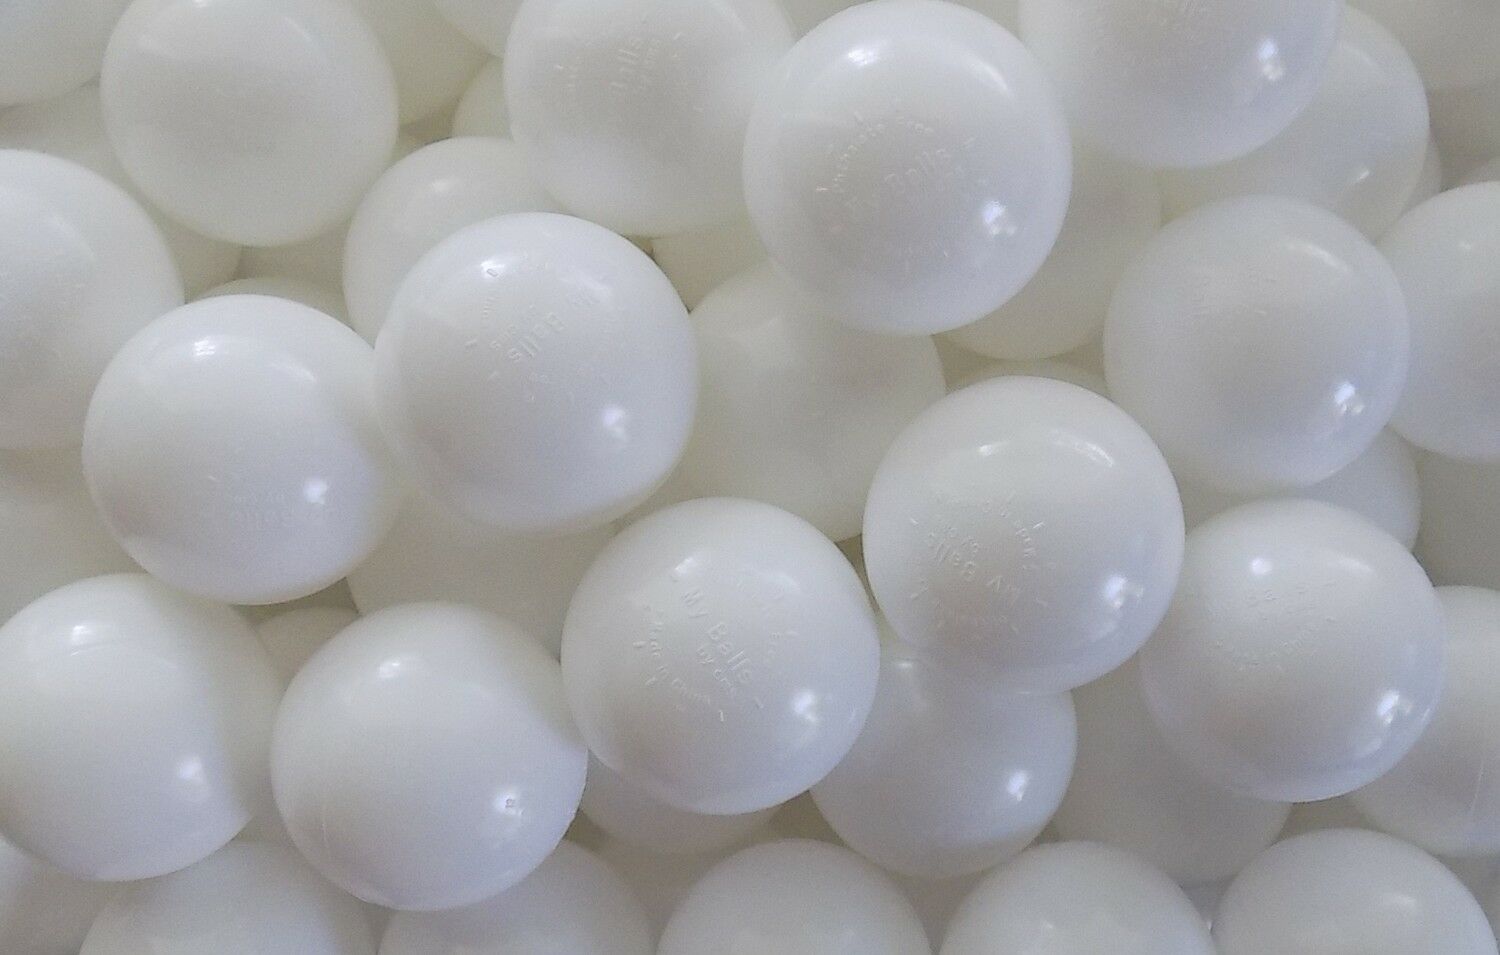 300 Jumbo Size 3" Snow-white Color Heavy Duty Commercial Grade Ball Pit Balls